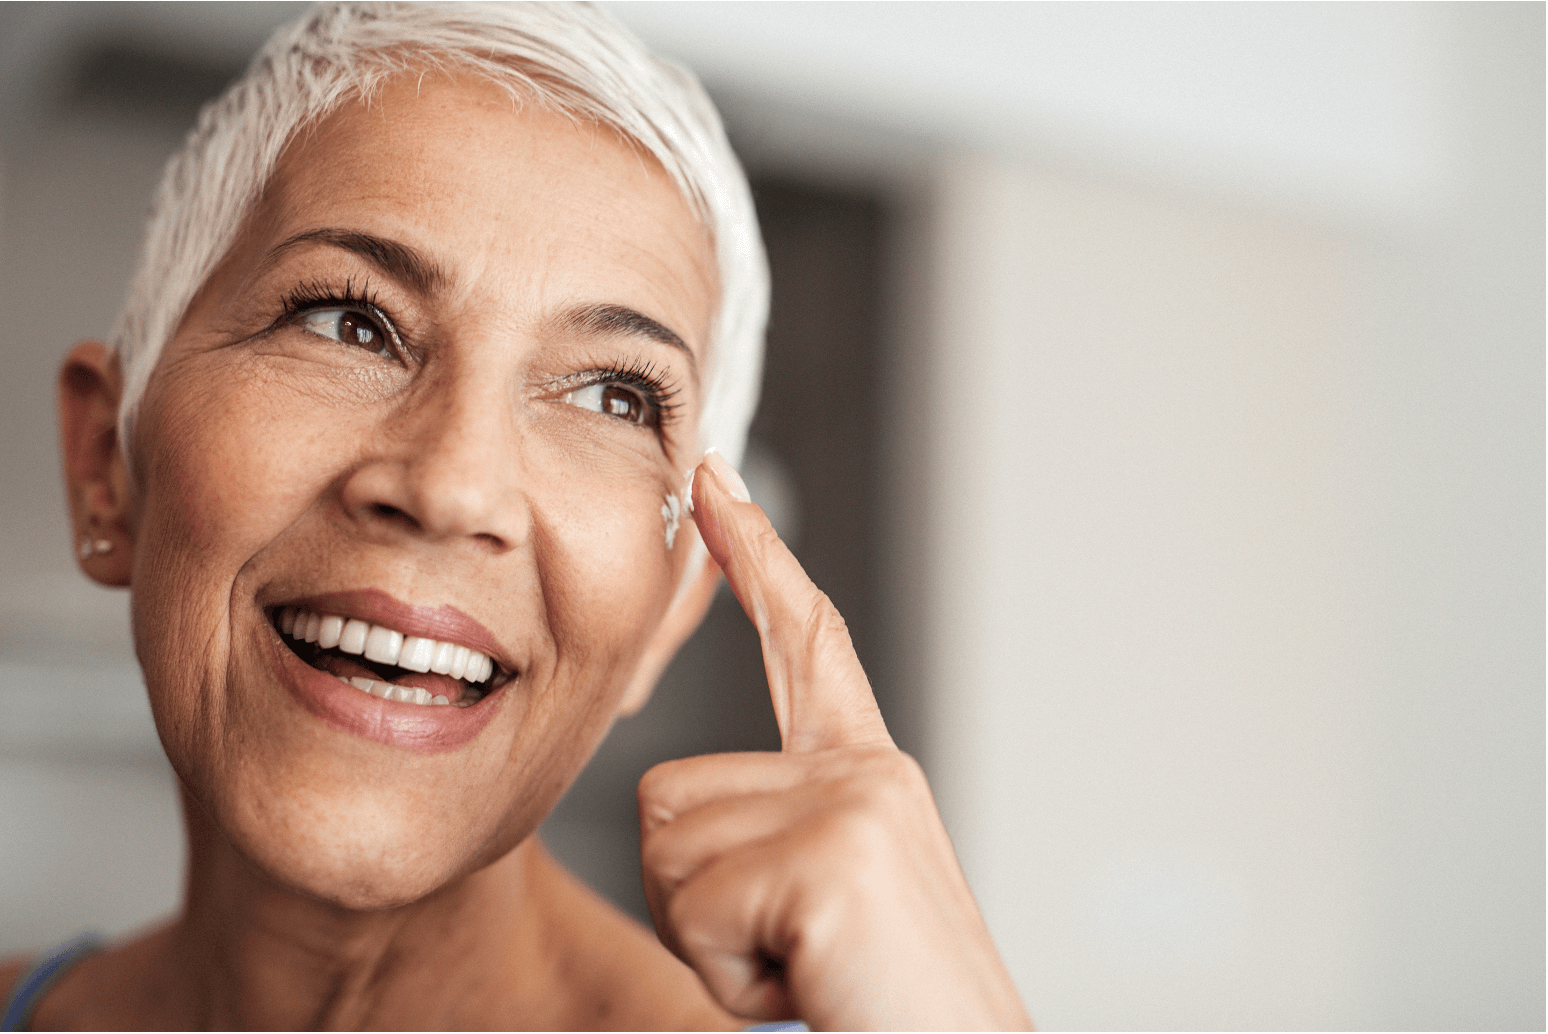 MENOPAUSE SKINCARE: NAVIGATING THE IMPACT OF HORMONAL CHANGES ON YOUR SKIN